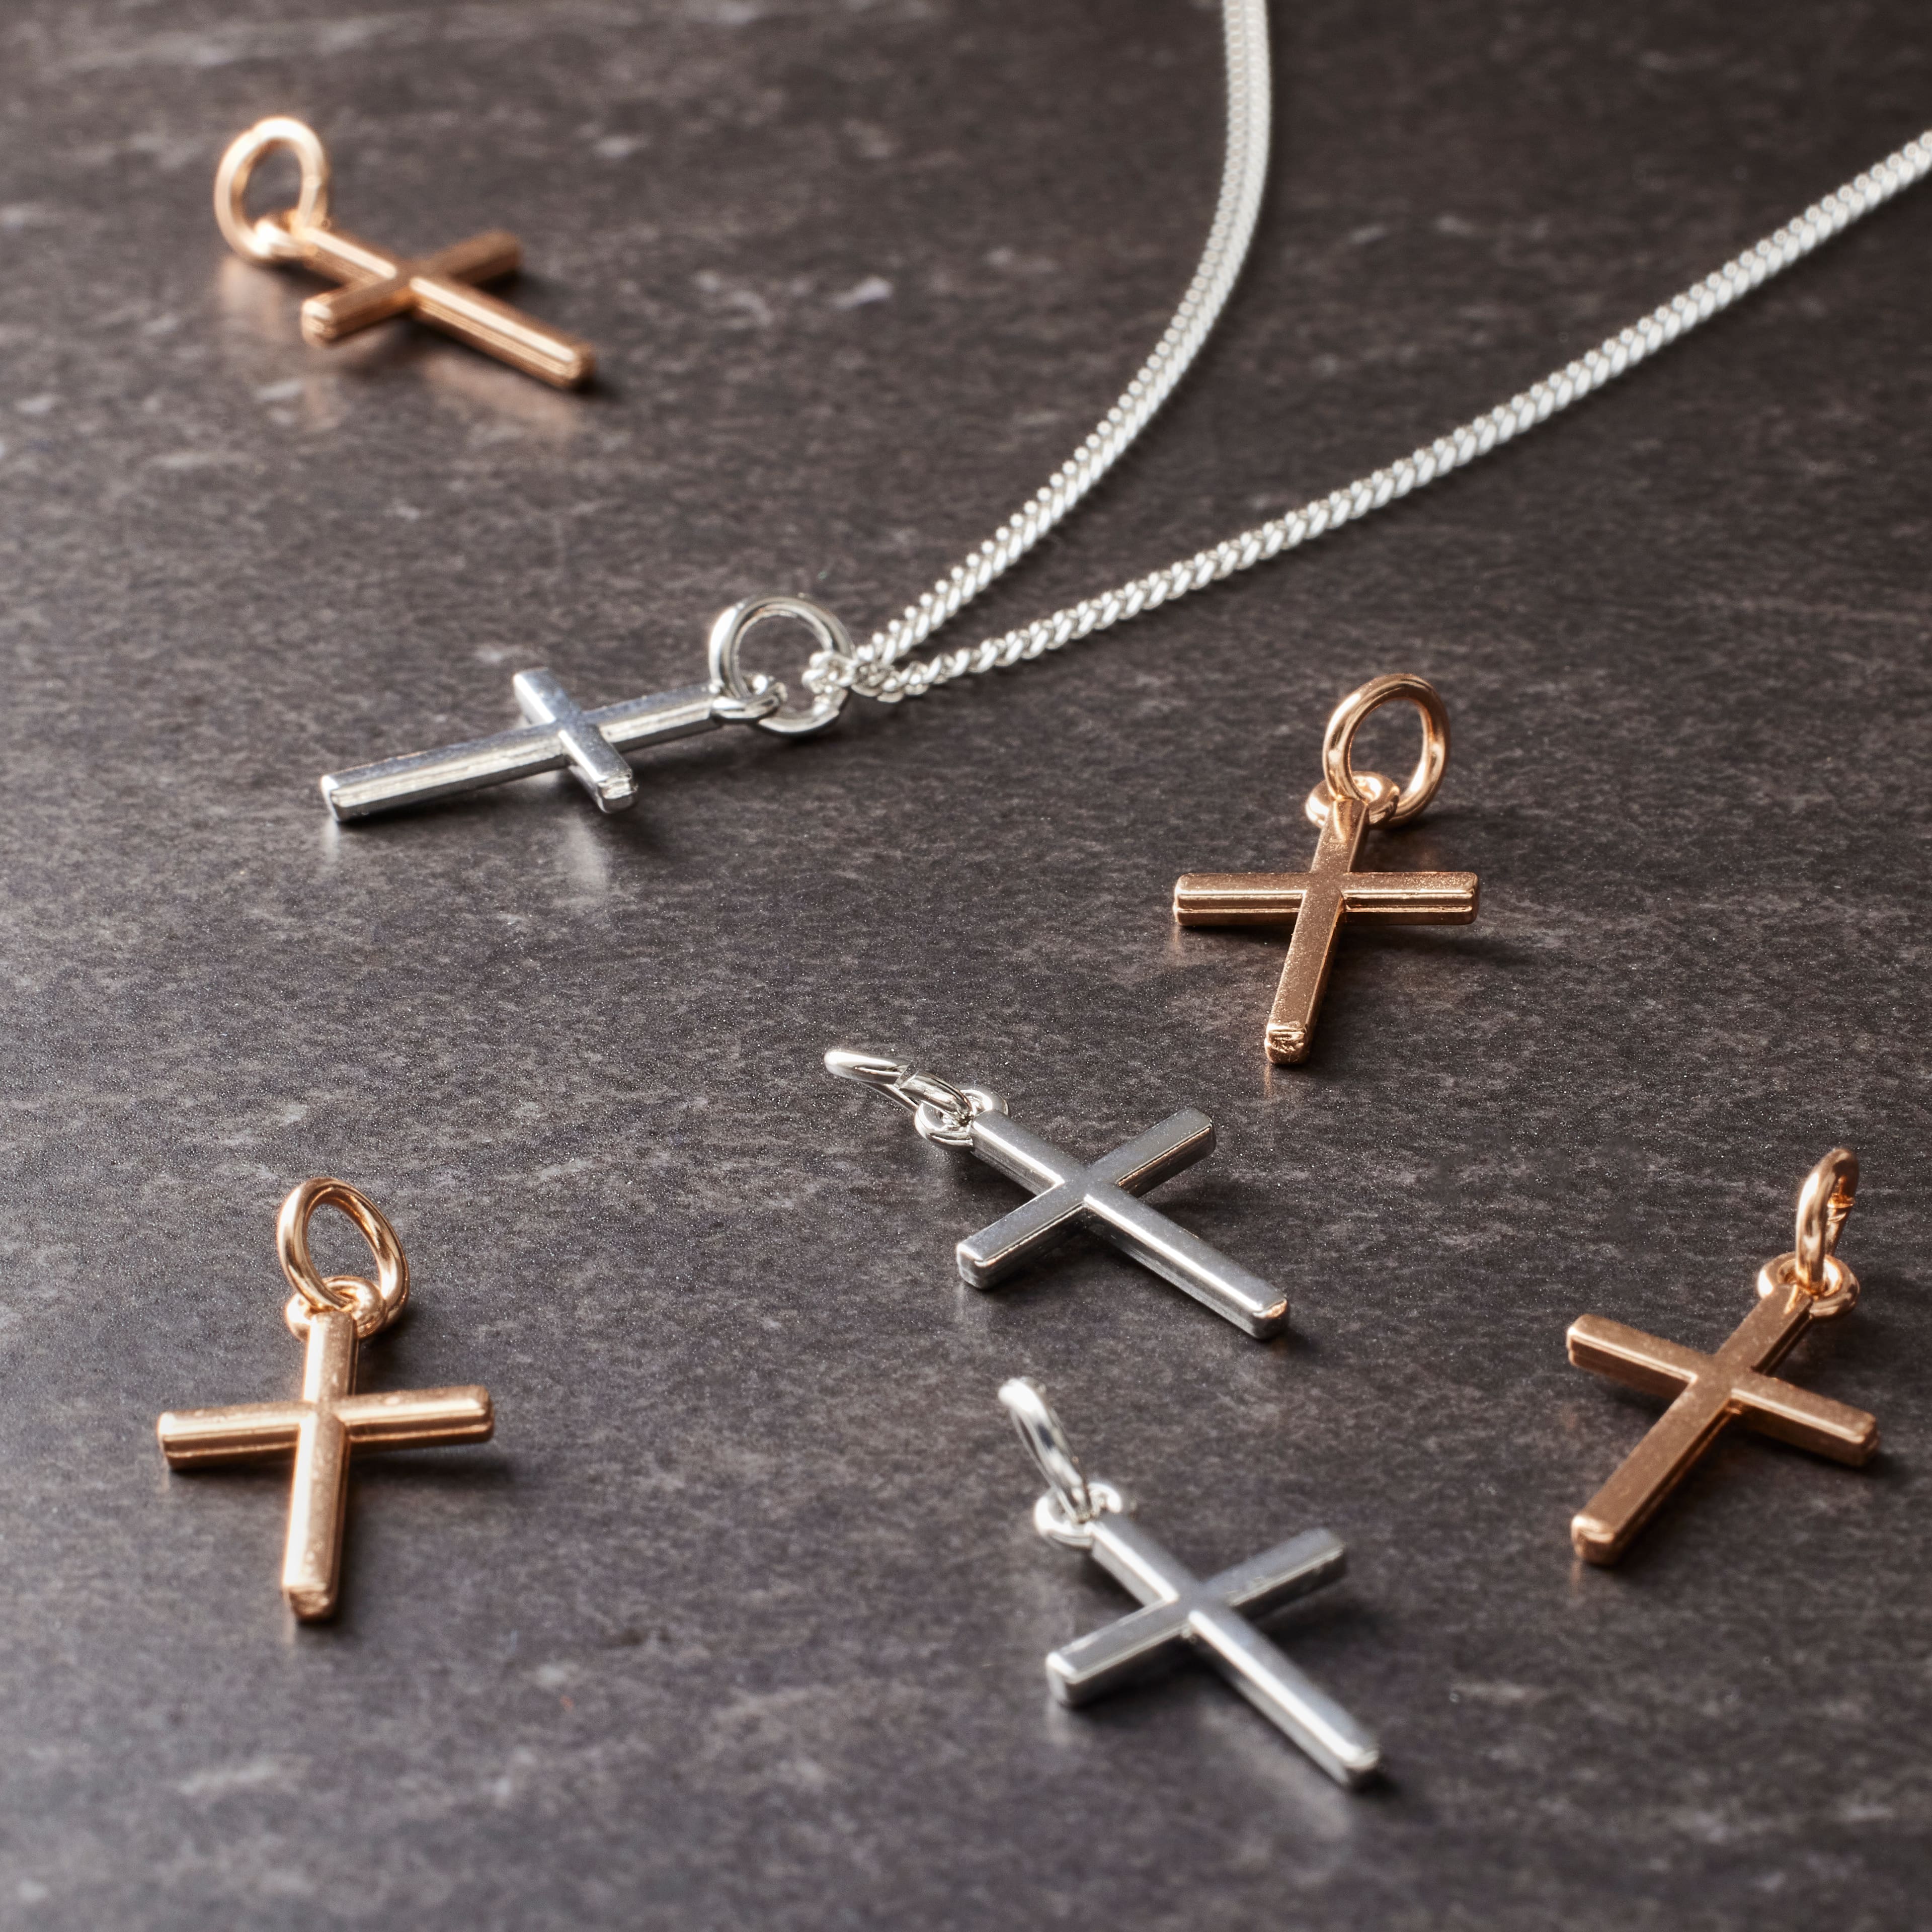 Shop for the Charmalong™ Metal Cross Charms by Bead Landing™ at